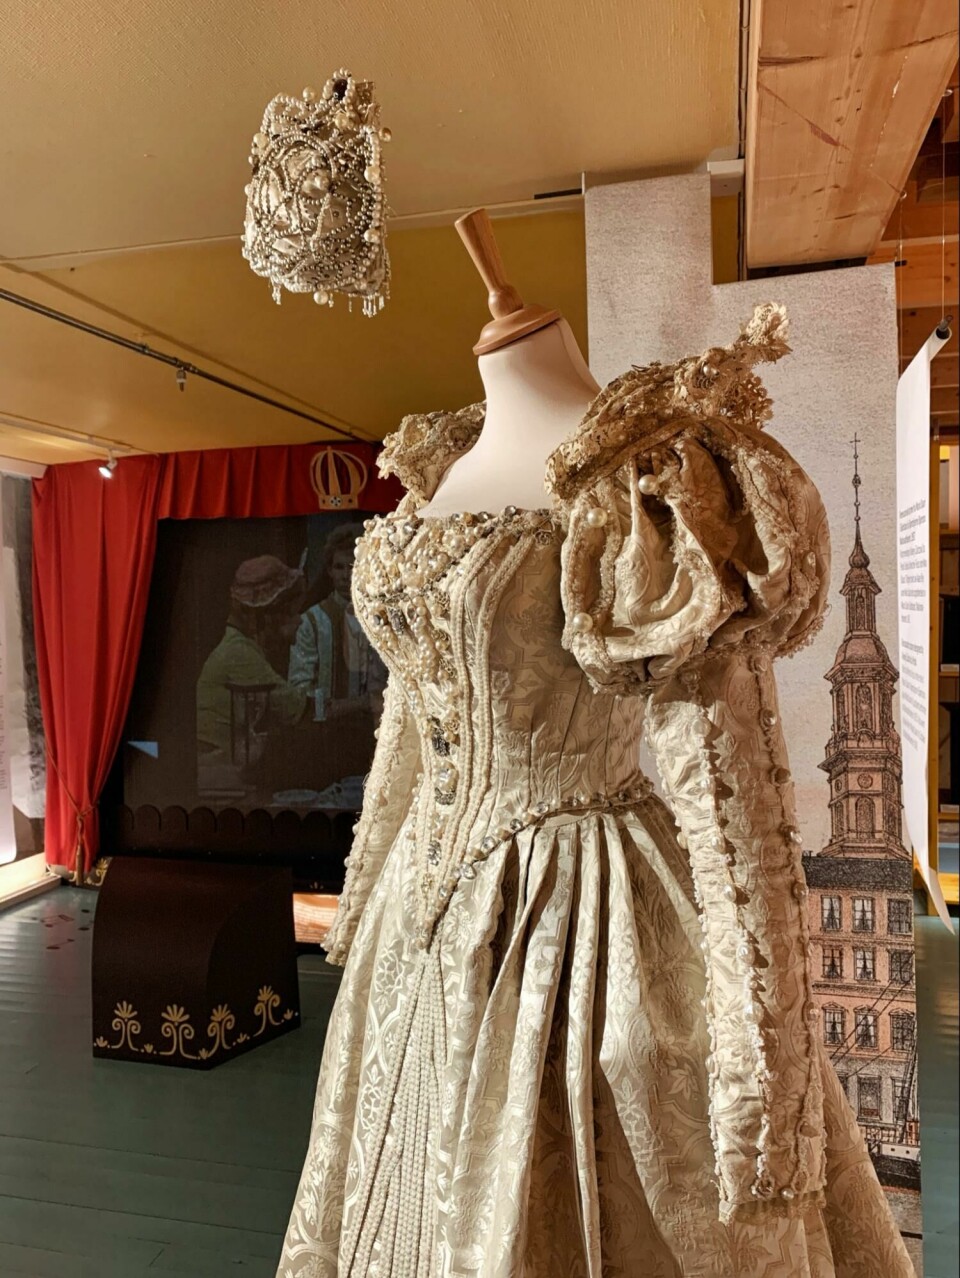 A Renaissance costume worn at Nationaltheatret in 1942 and 1957.